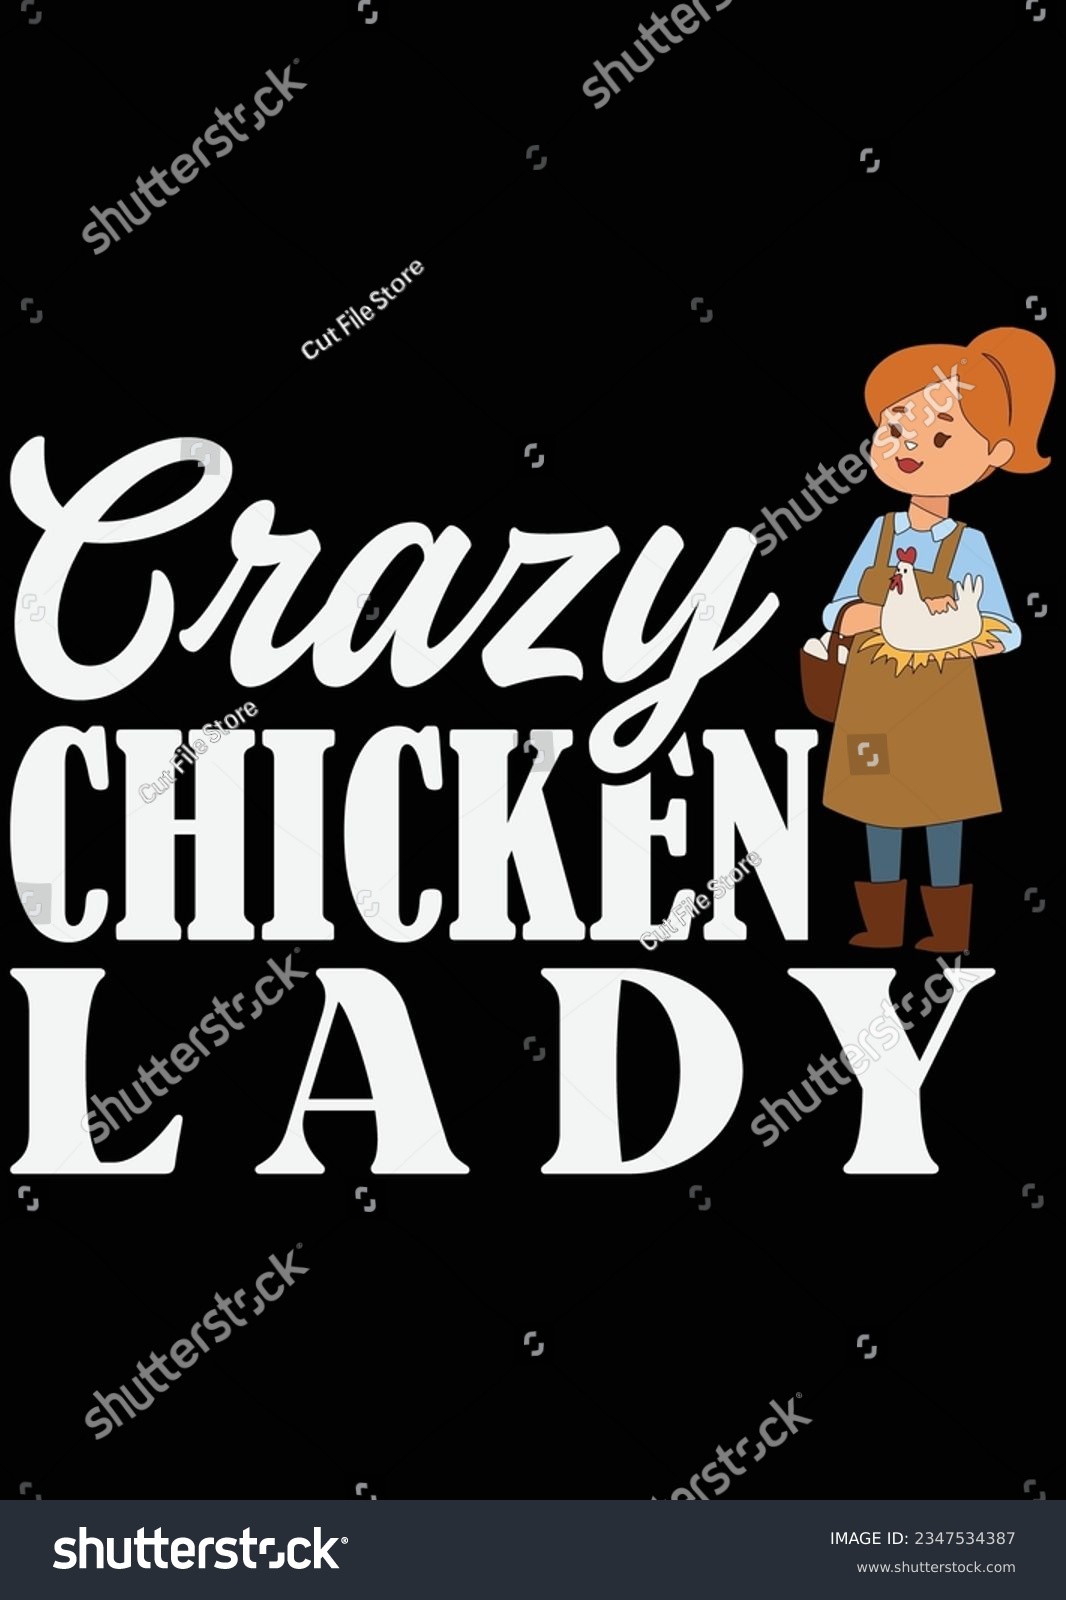 SVG of Crazy Chicken Lady eps cut file for cutting machine svg